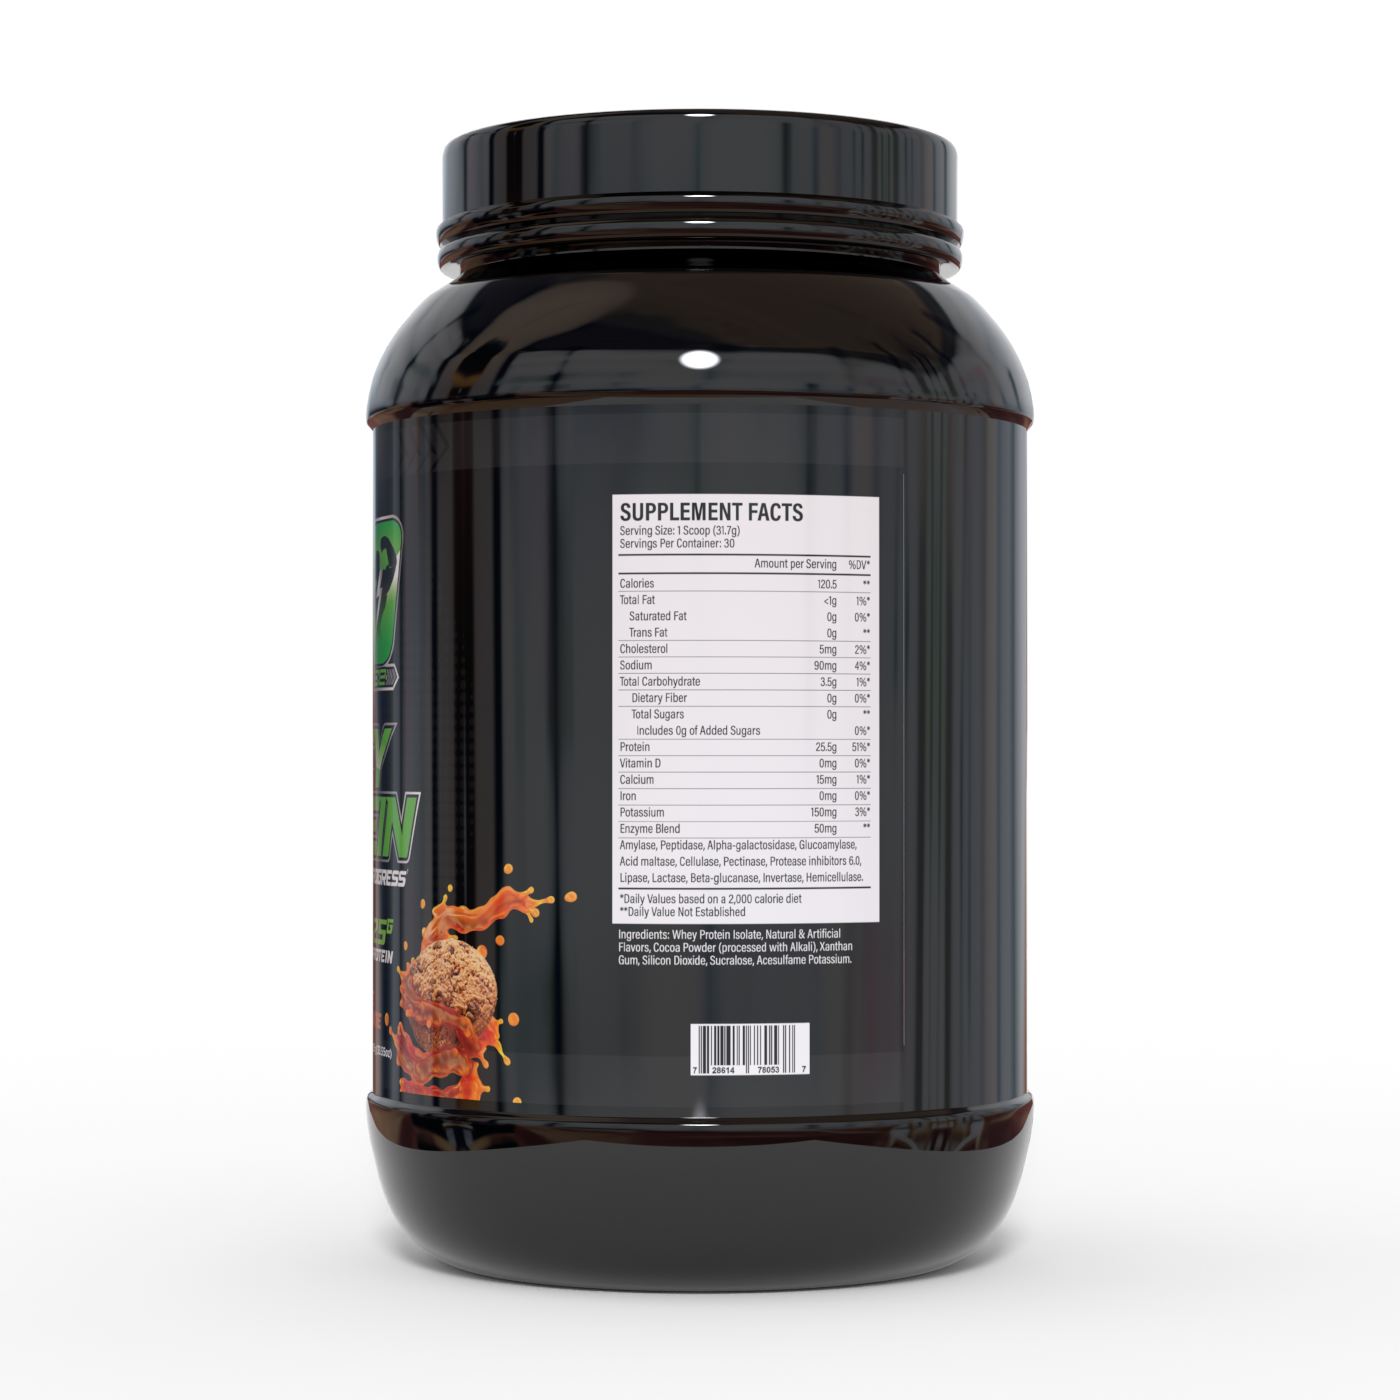 Black container with supplement facts